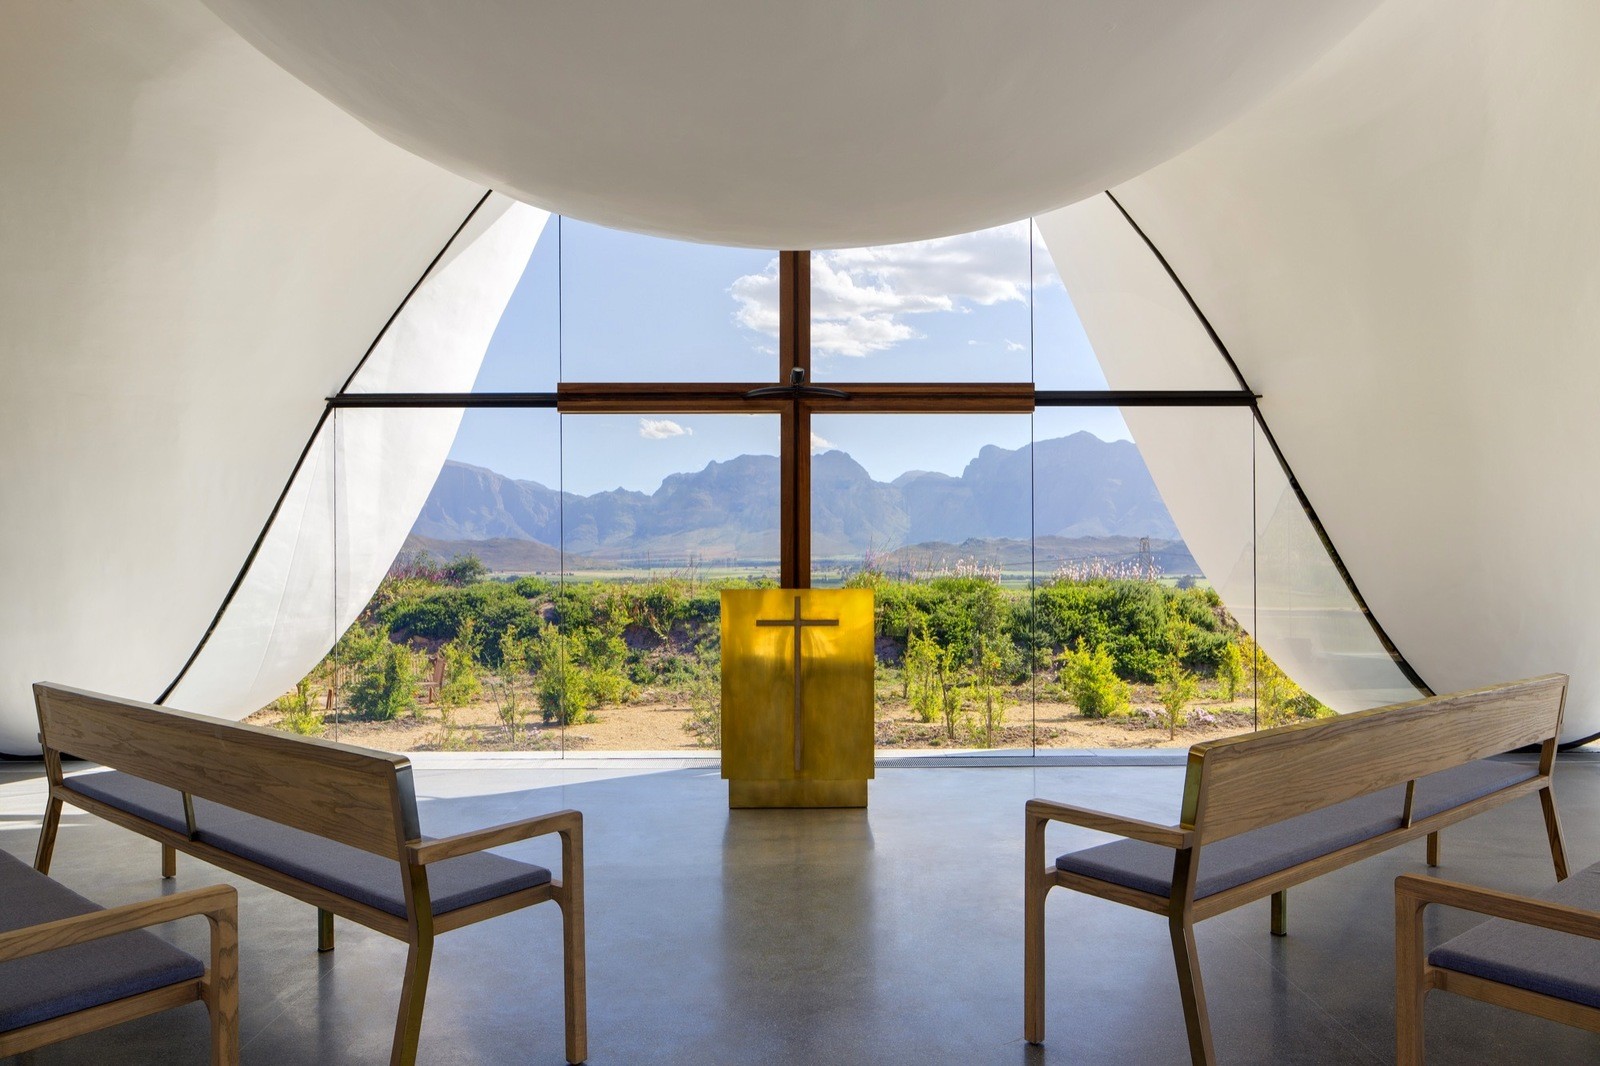  Boches Chapel in South Africa